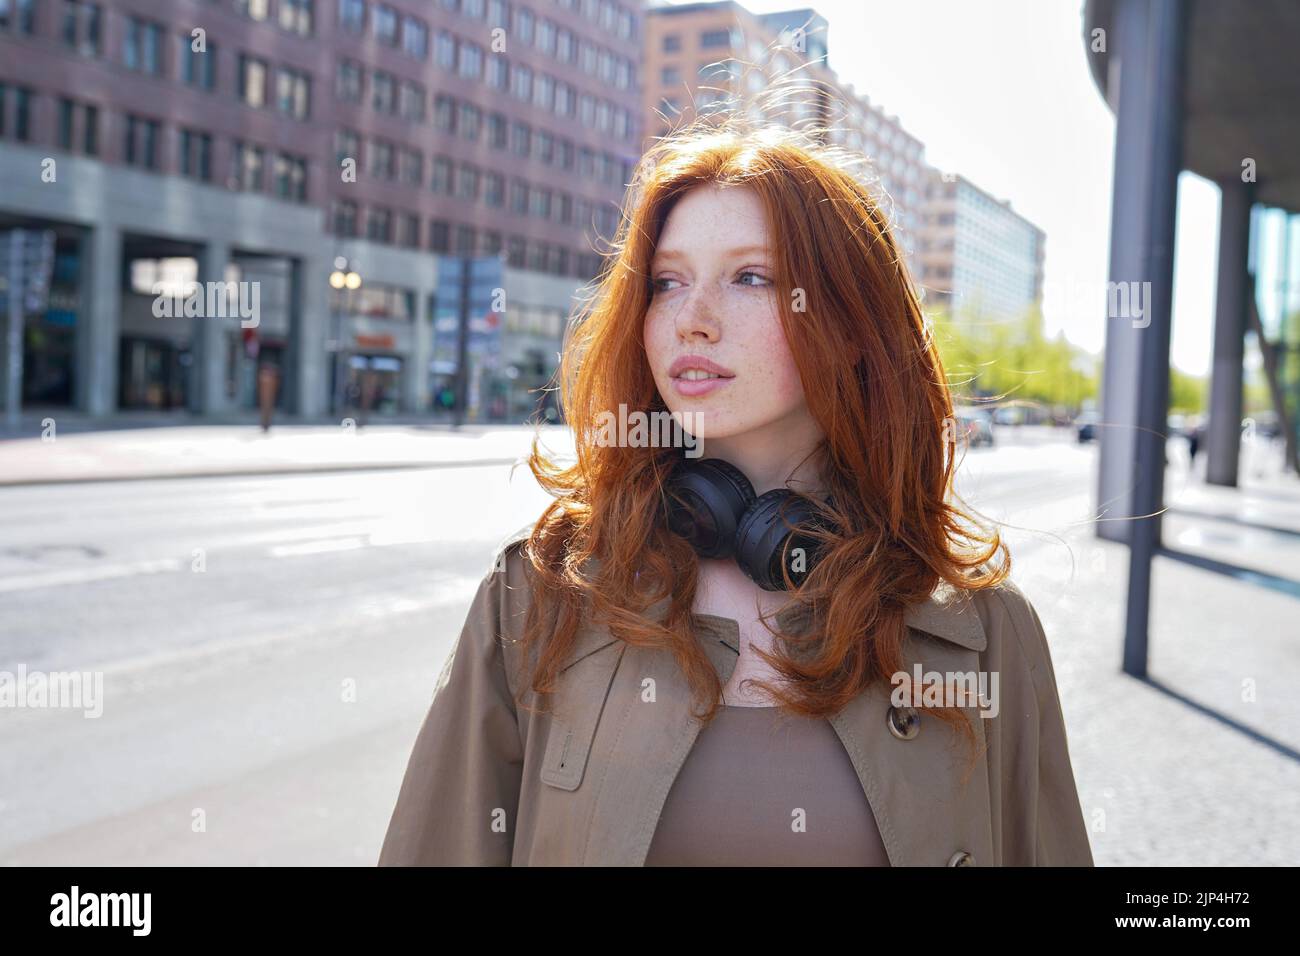 Teen hipster redhead girl looking at camera standing on urban street. Stock Photo